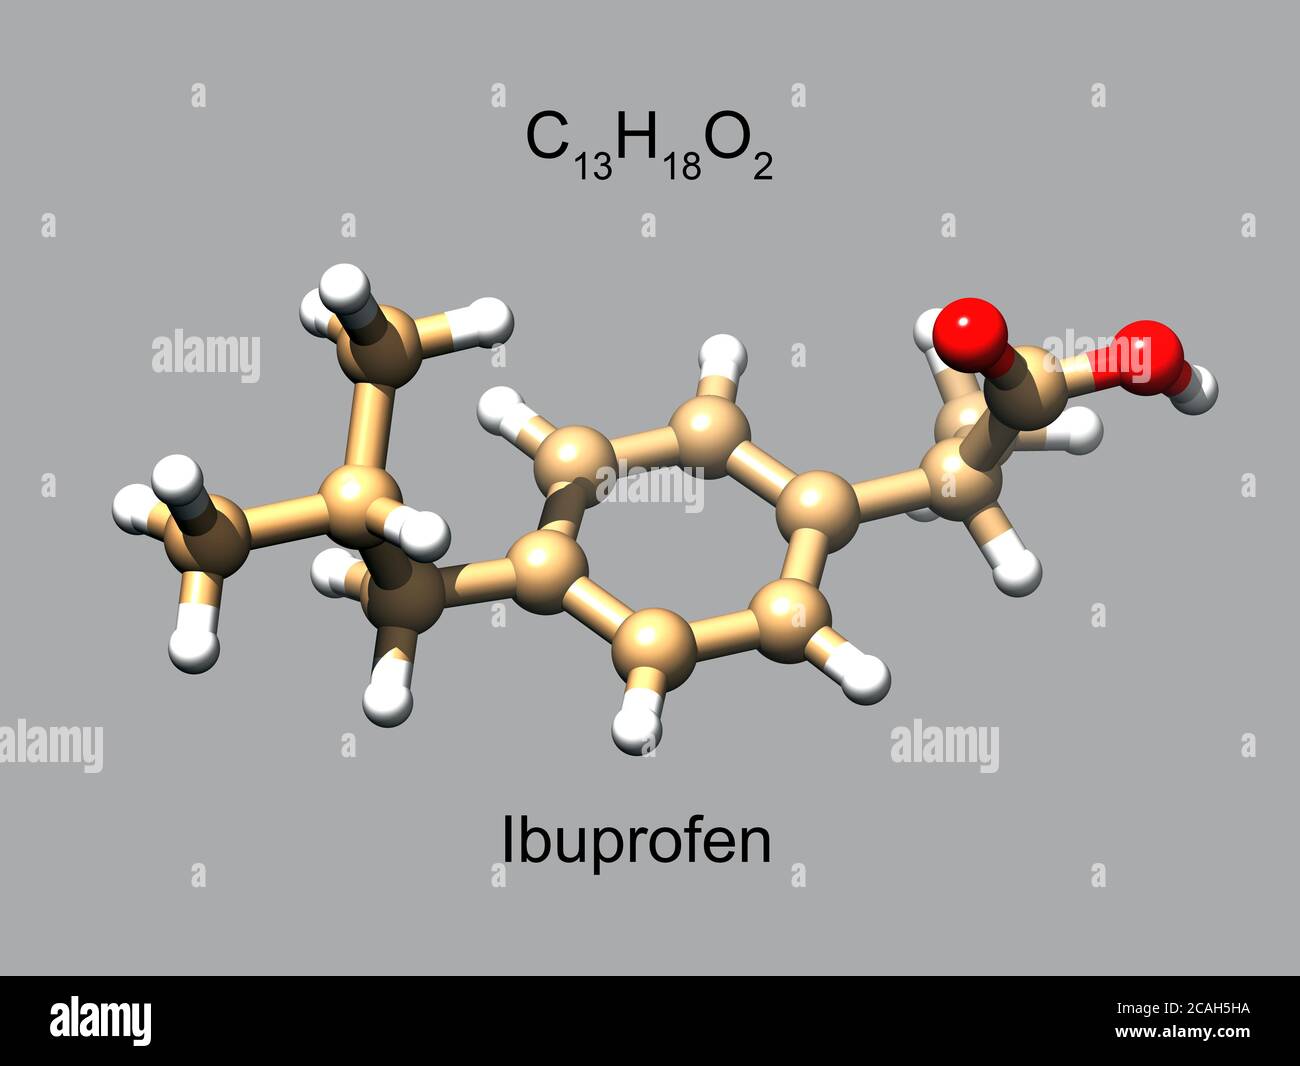 Structure of ibuprofen, a common non-steroid anti-inflammatory drug, 3D ball-and-stick model, gray background Stock Photo